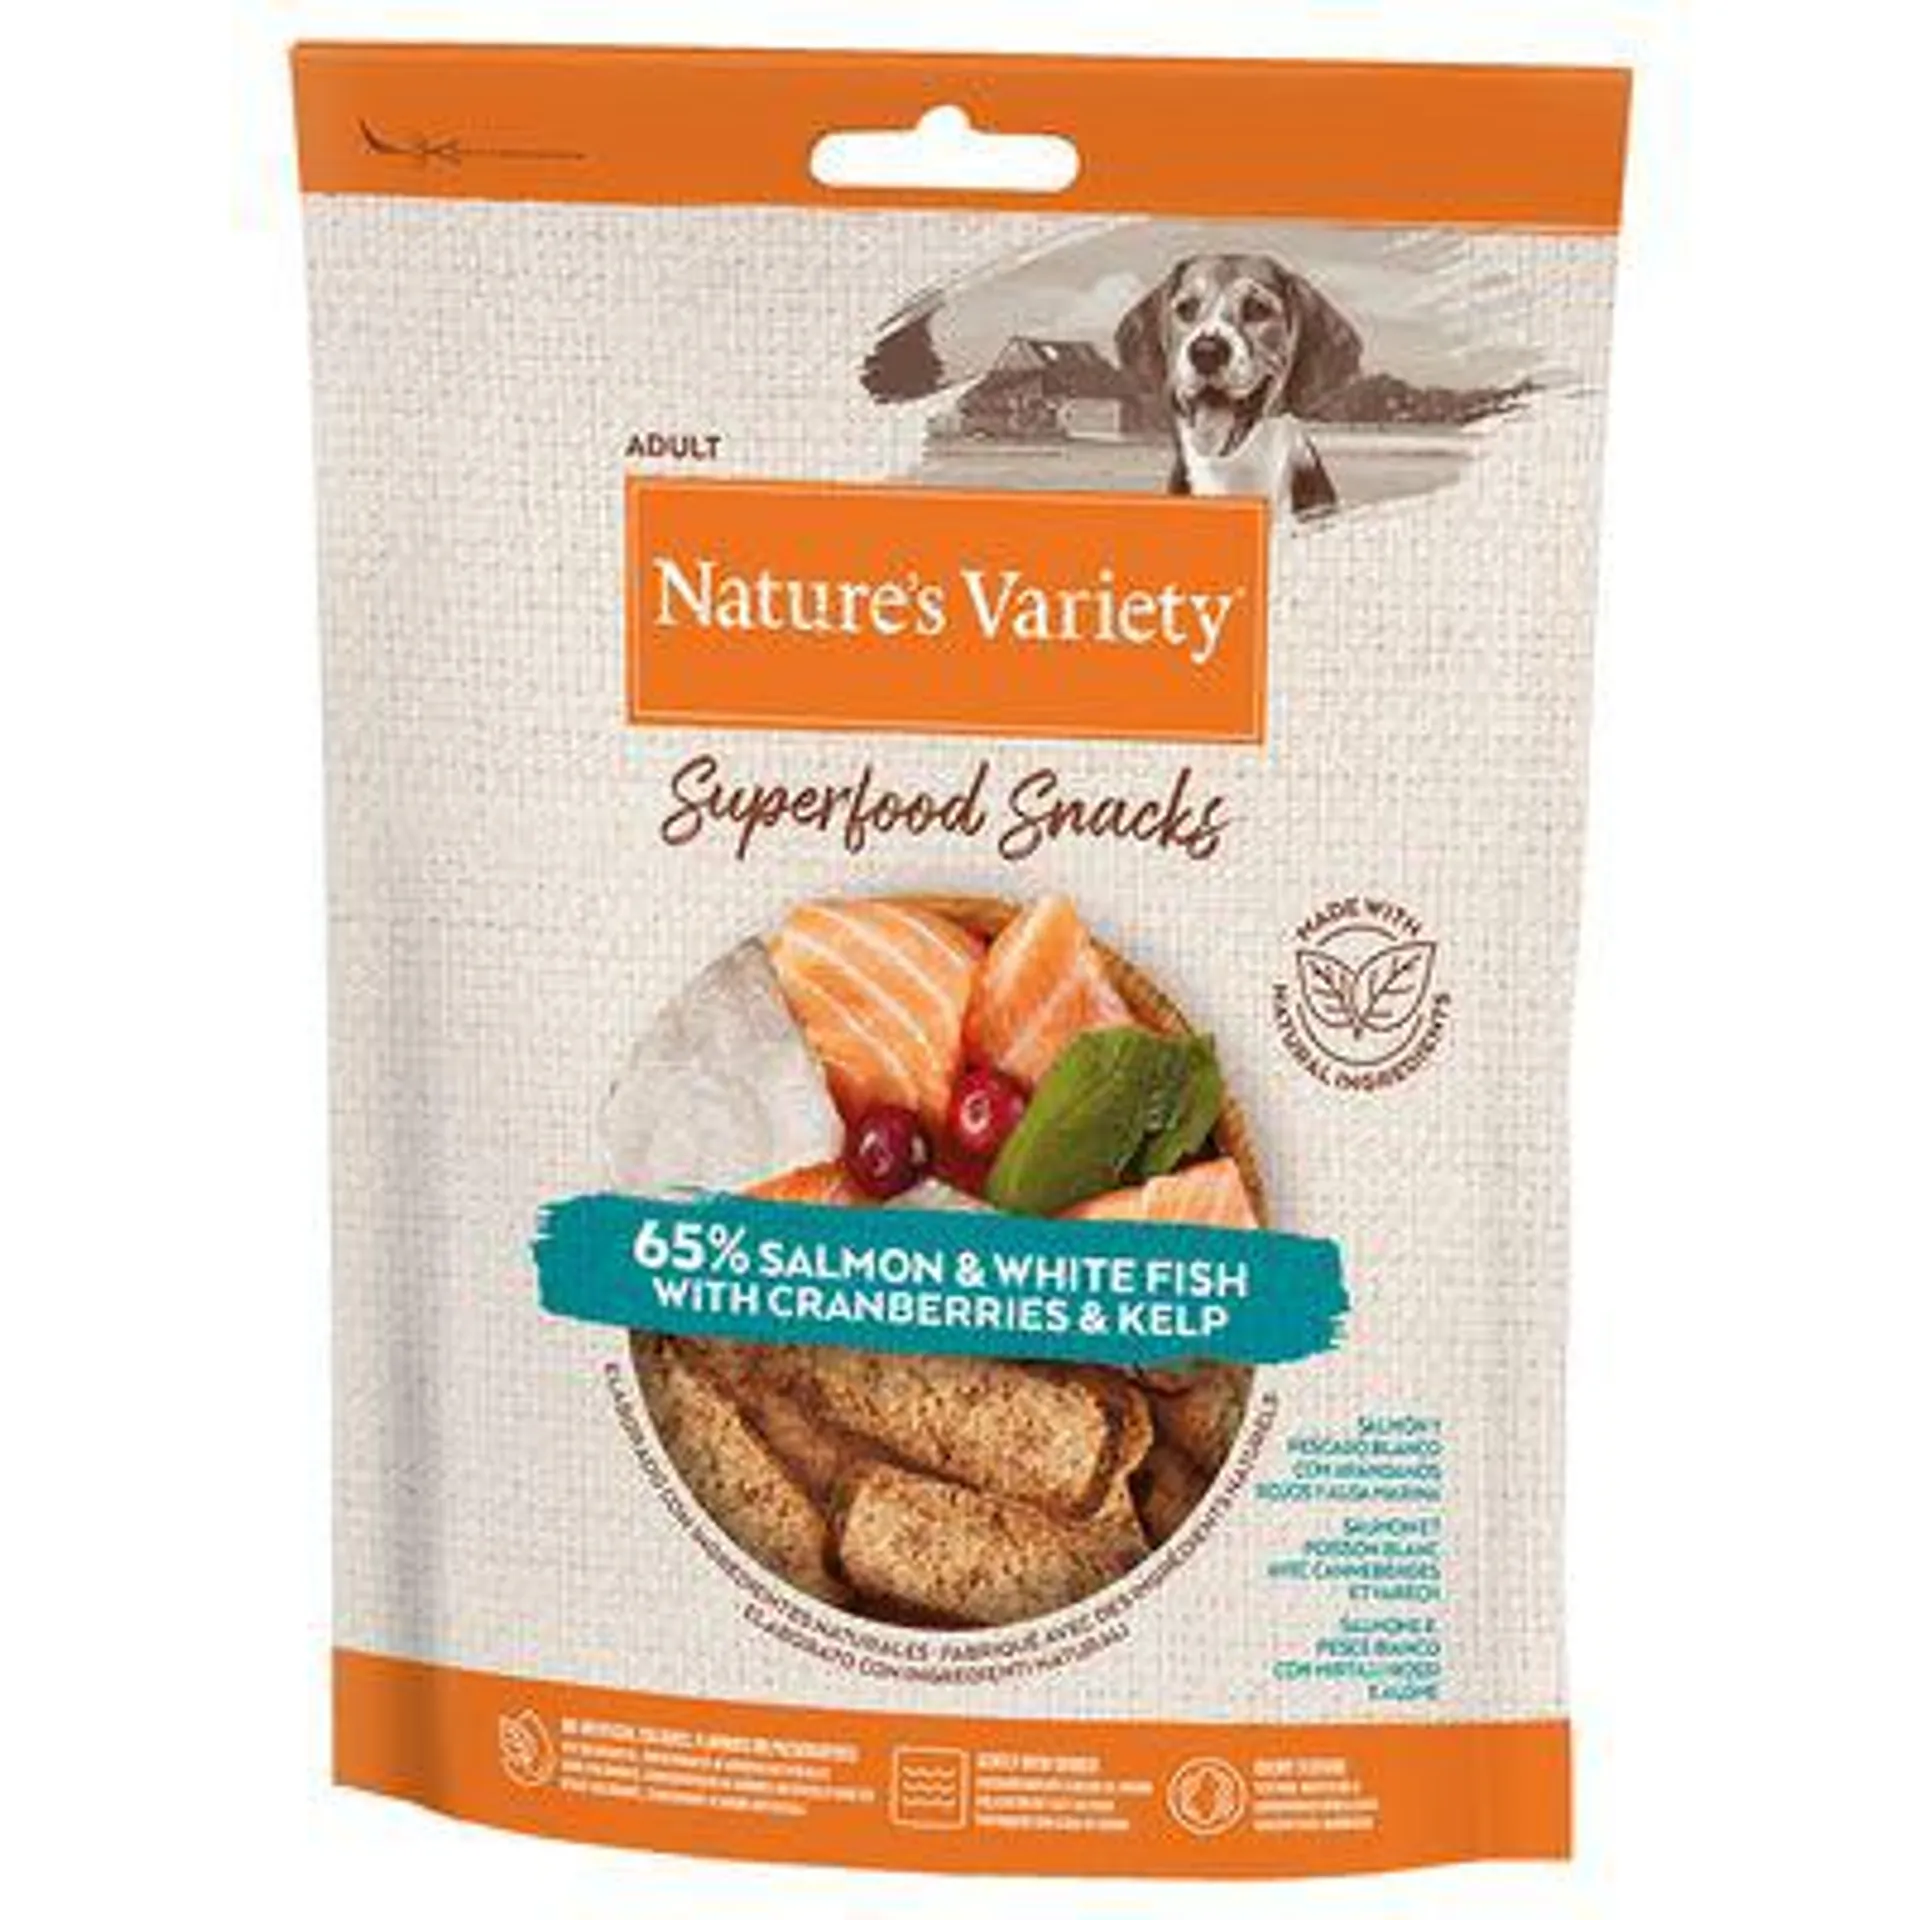 2 x 85g Nature's Variety Superfood Dog Snacks - 25% Off! *